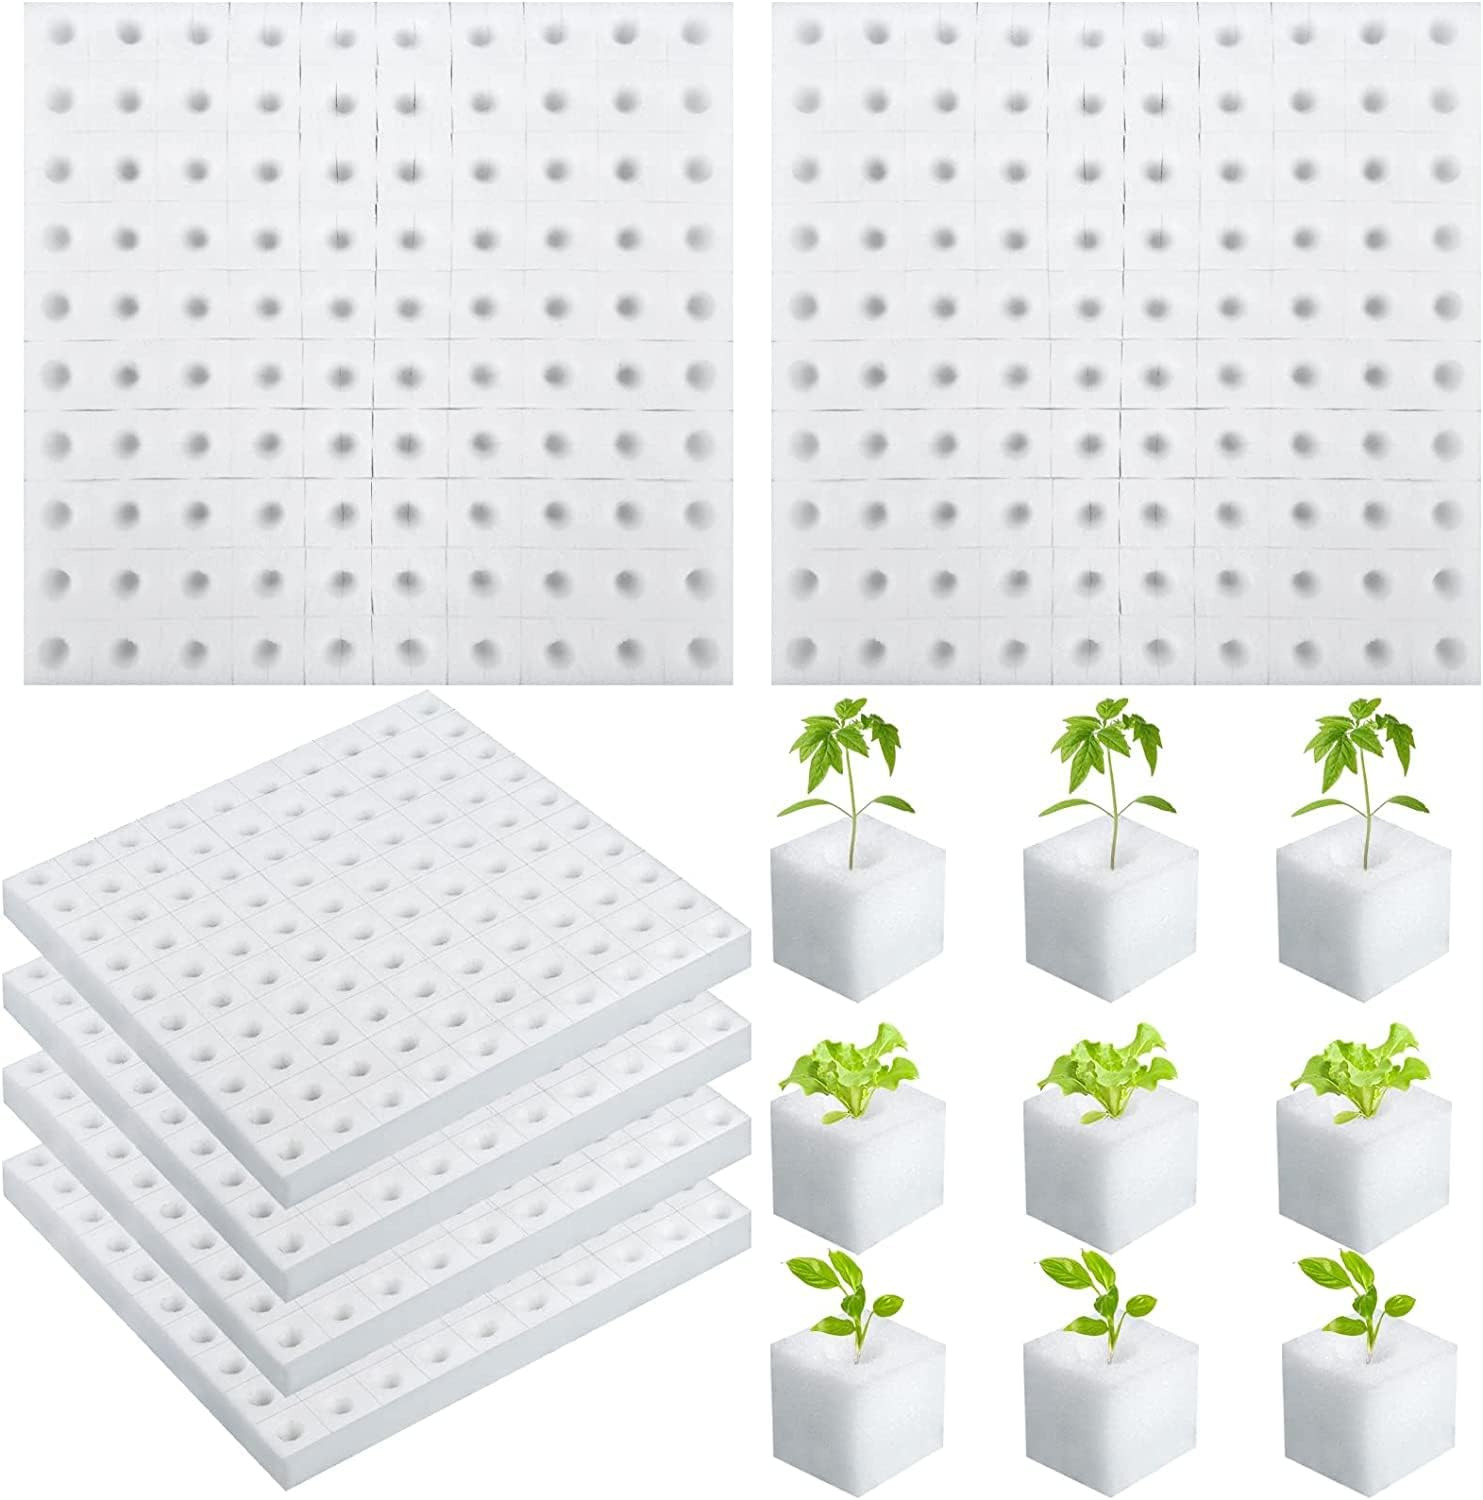 600 Pcs Hydroponic Sponges Planting Gardening Tool Soilless Cultivation Seedling